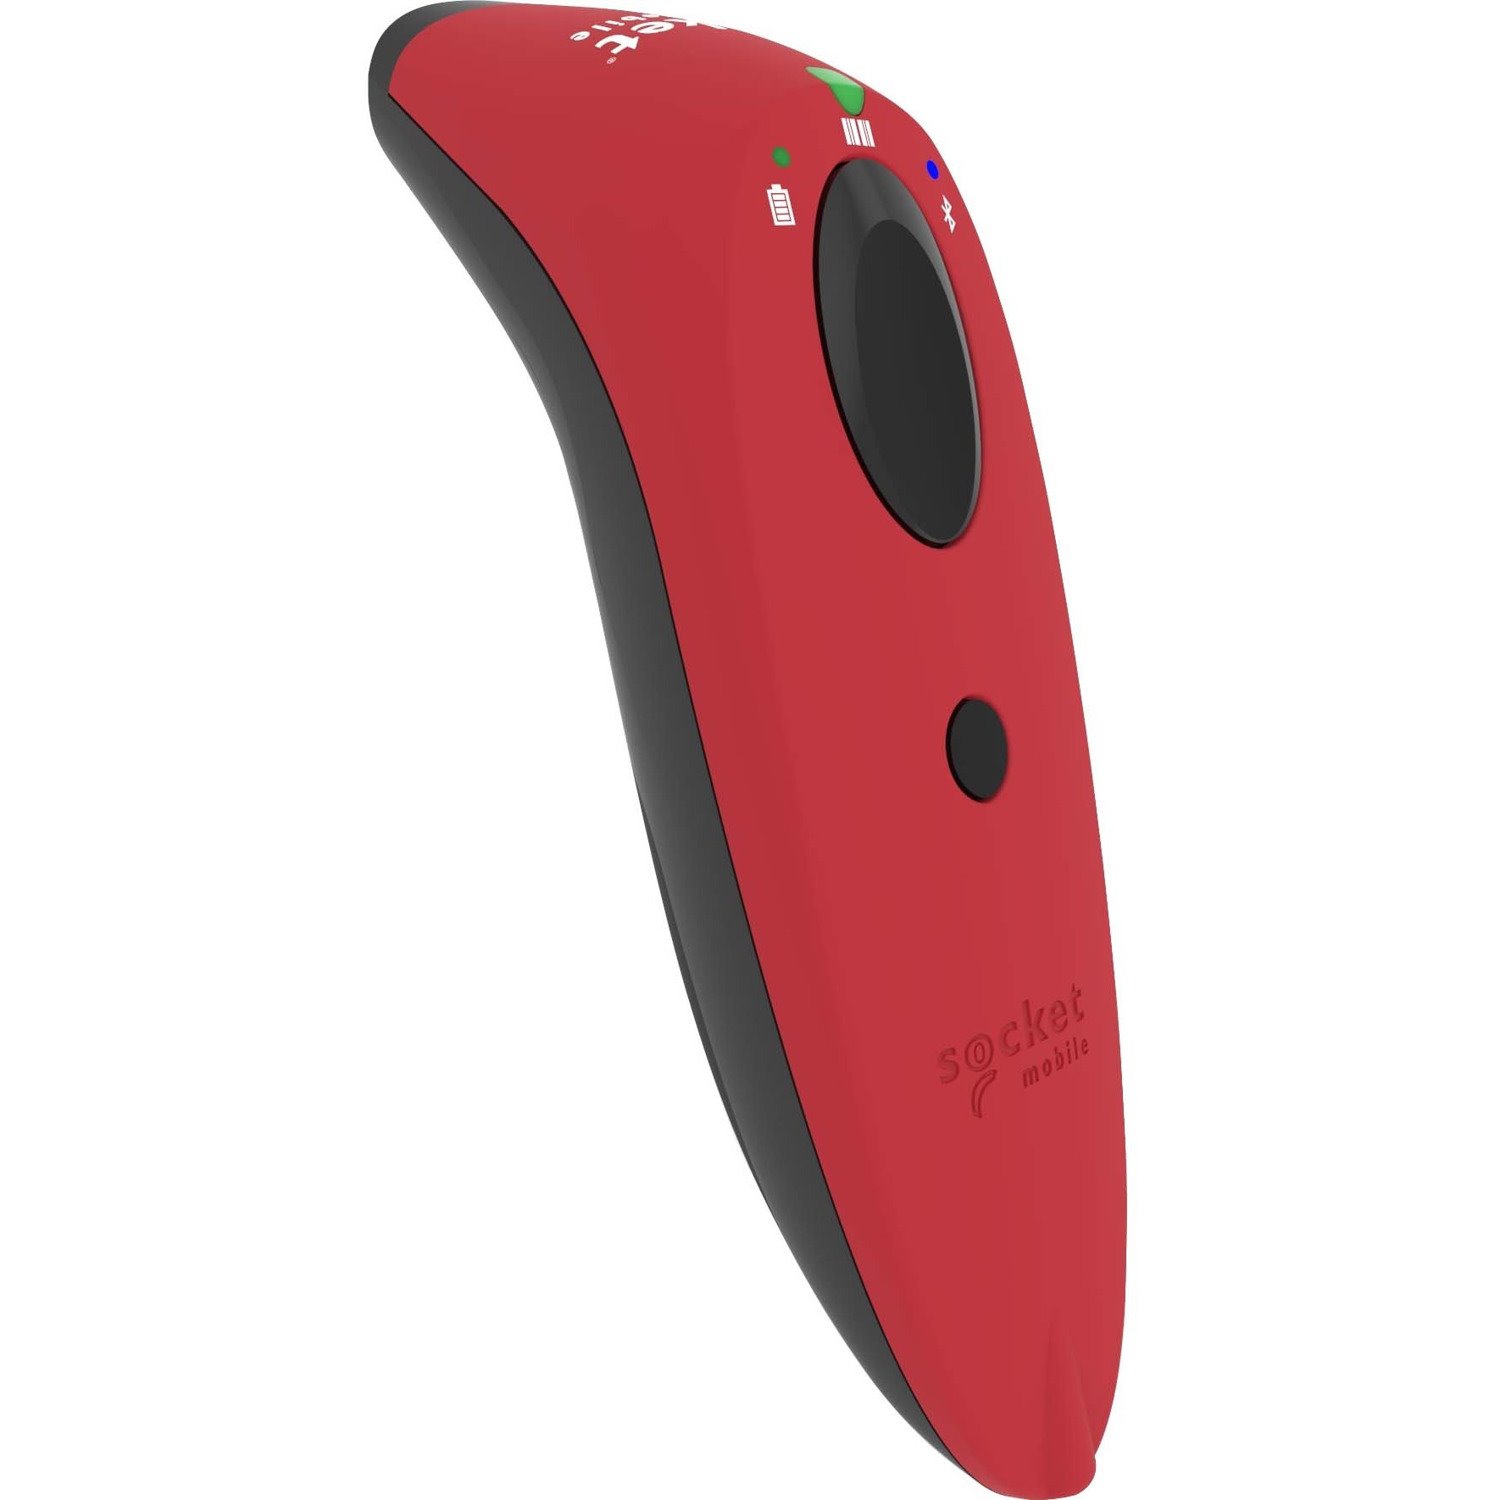 Socket Mobile SocketScan S740 Handheld Barcode Scanner - Wireless Connectivity - Red